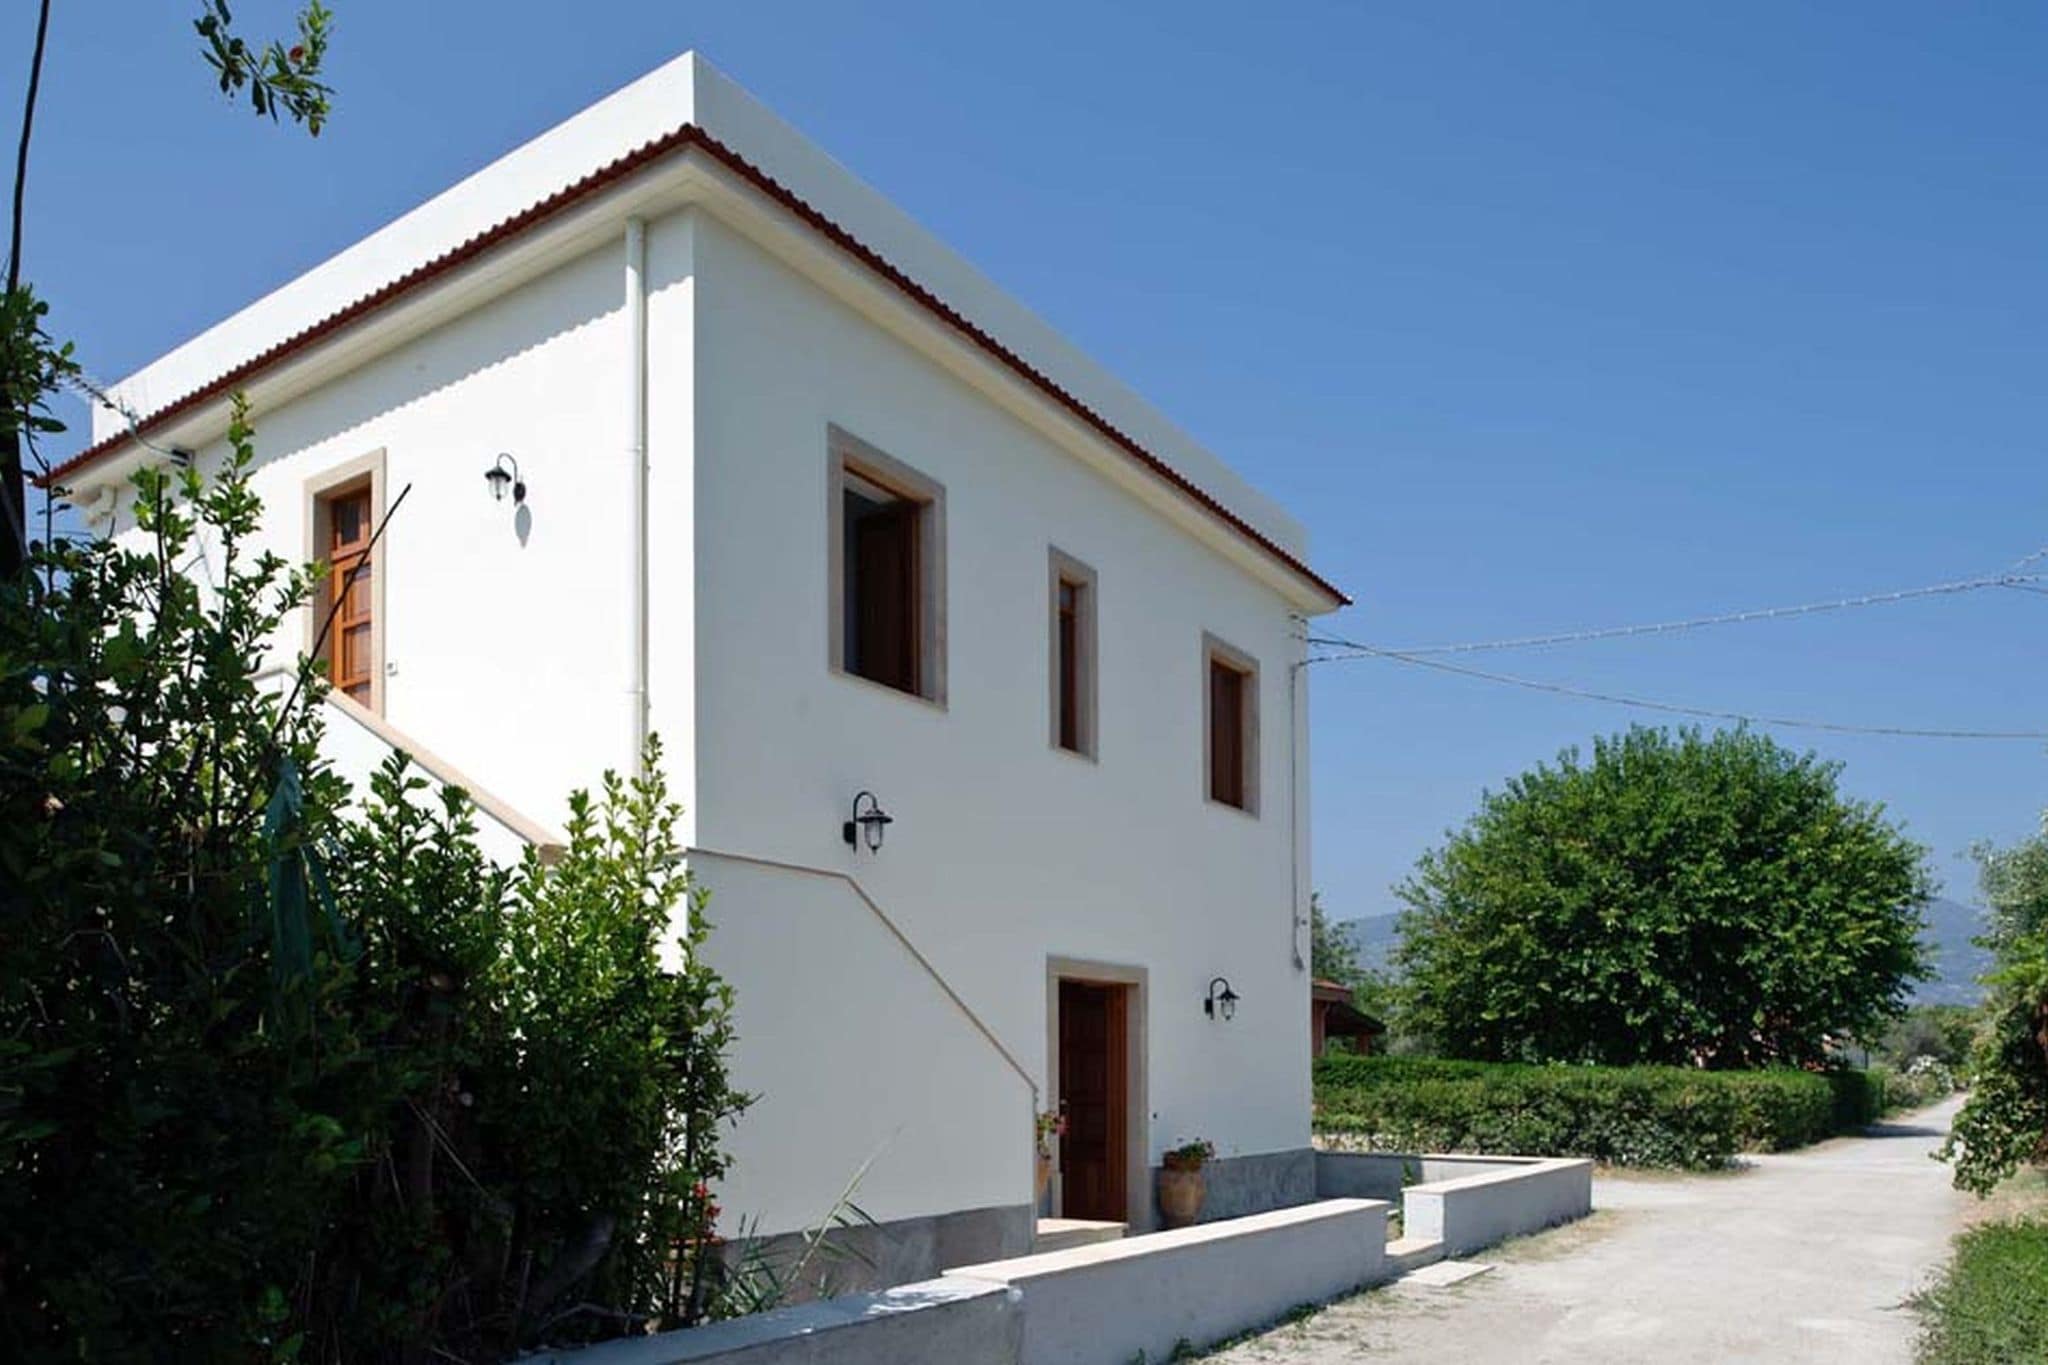 Detached villa in an excellent location, only 200 meters from the sea!